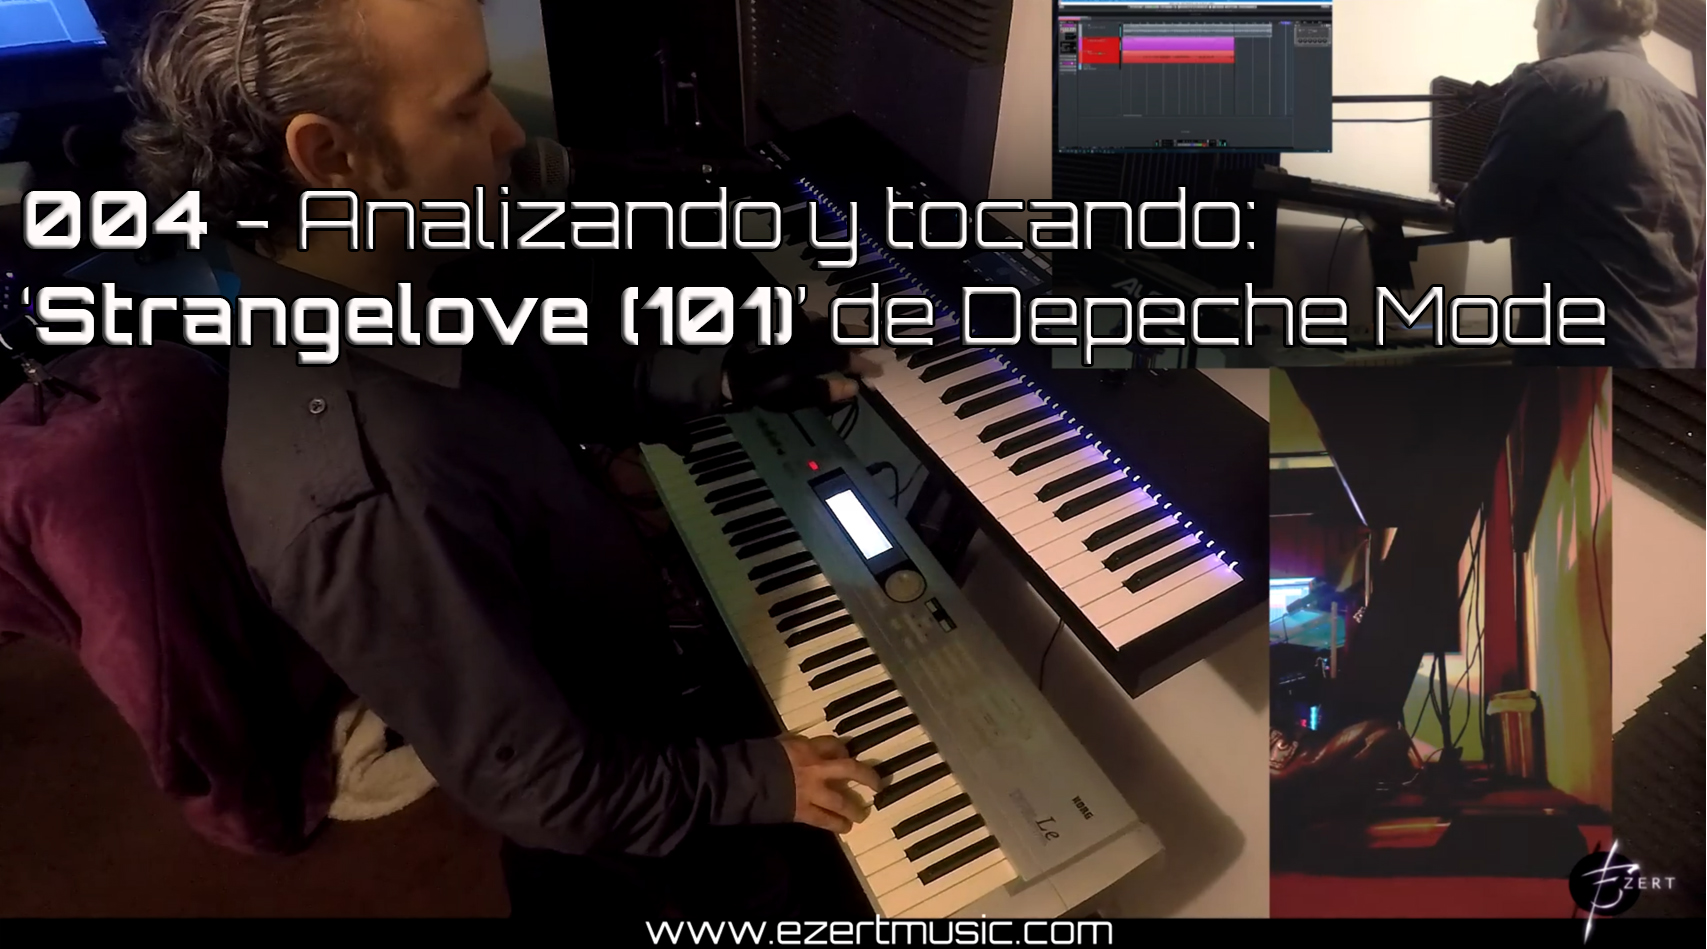 Ezert analyzes and performs Depeche Mode's "Strangelove" 101 version
Subscribe to the channel!